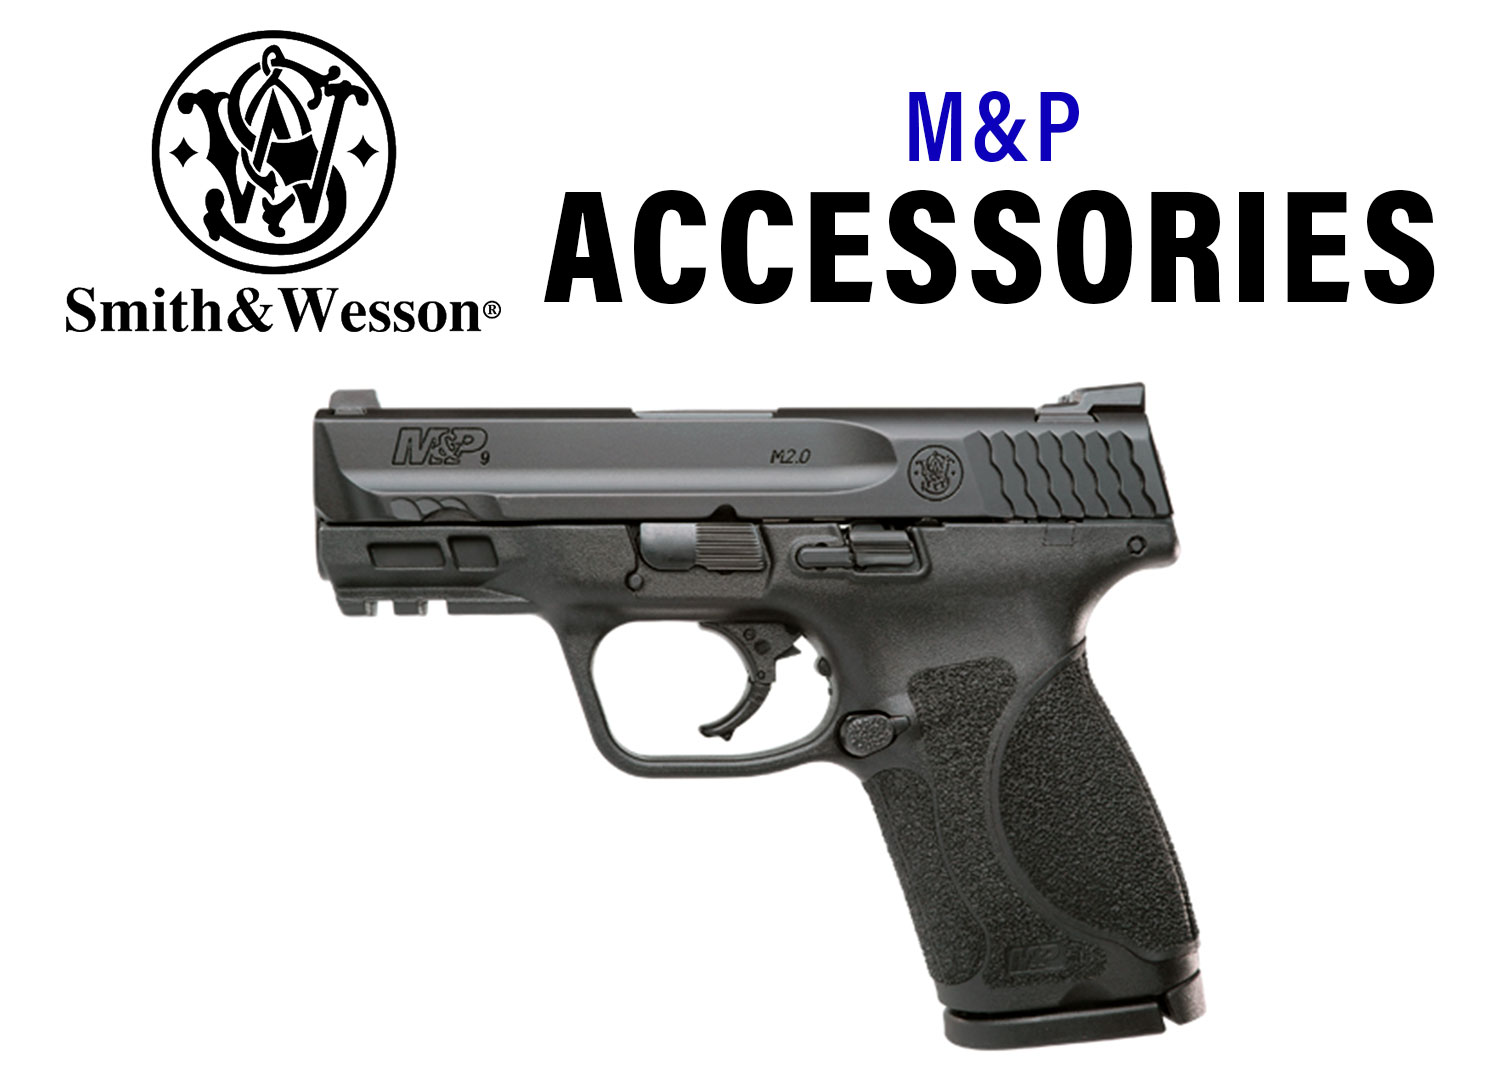 Smith and Wesson M&P Accessories